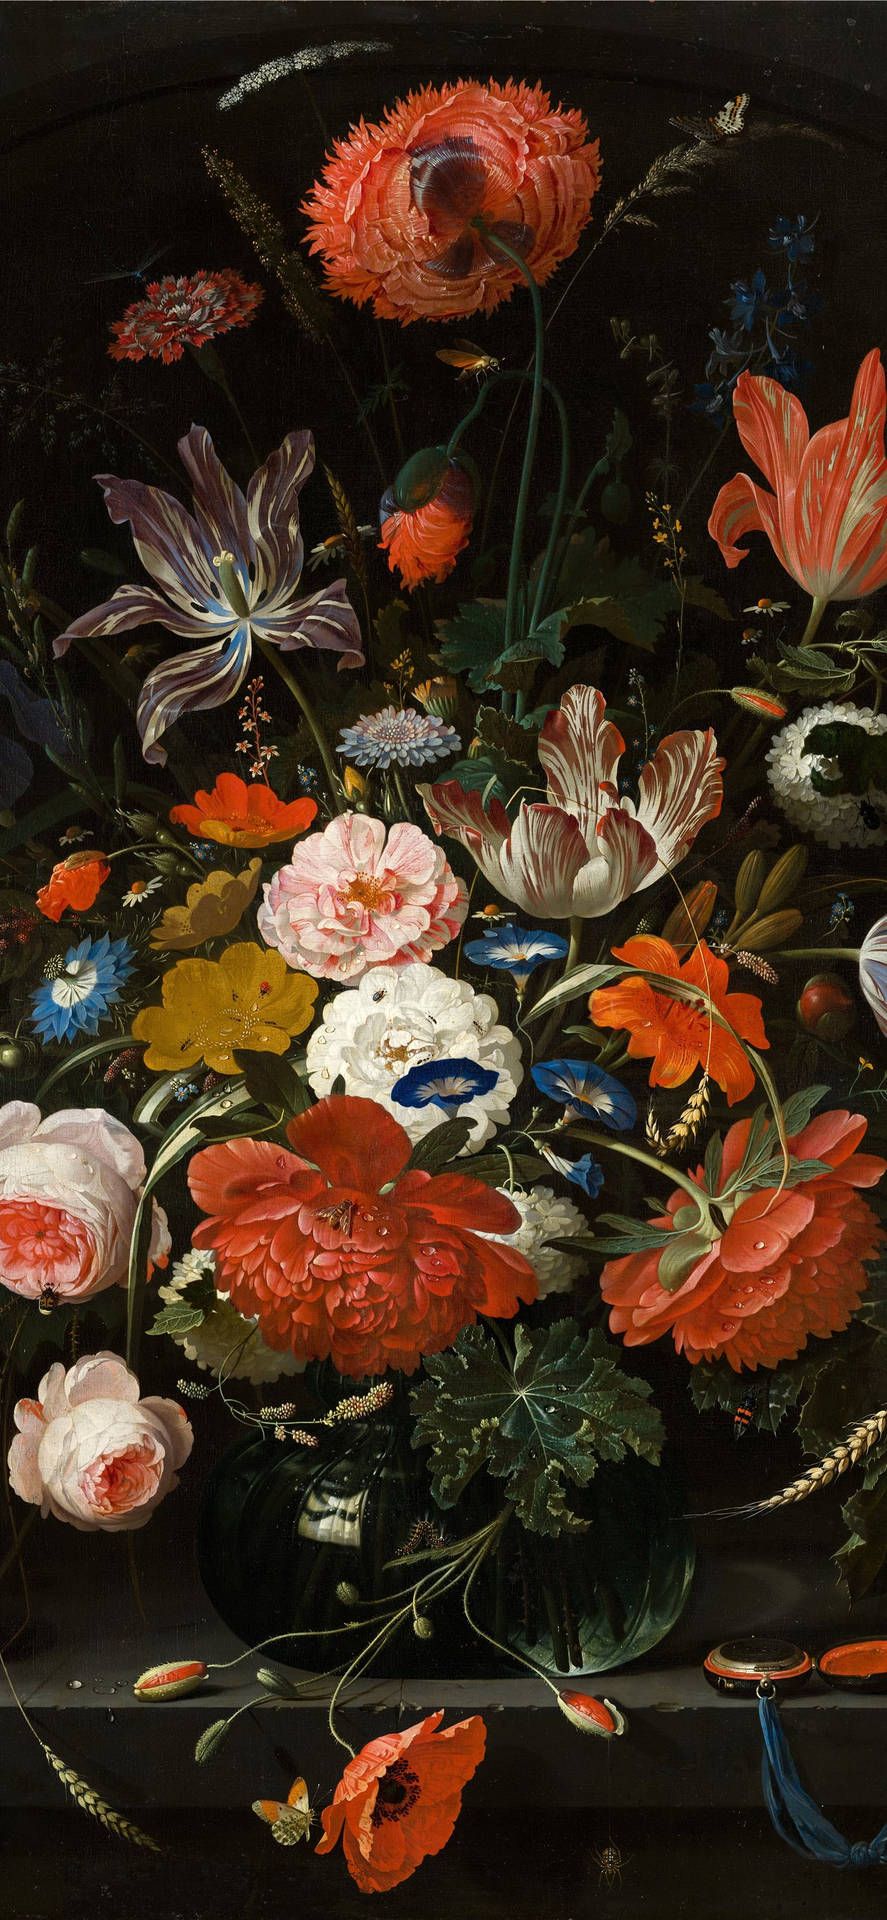 A painting of flowers in vase on table - 